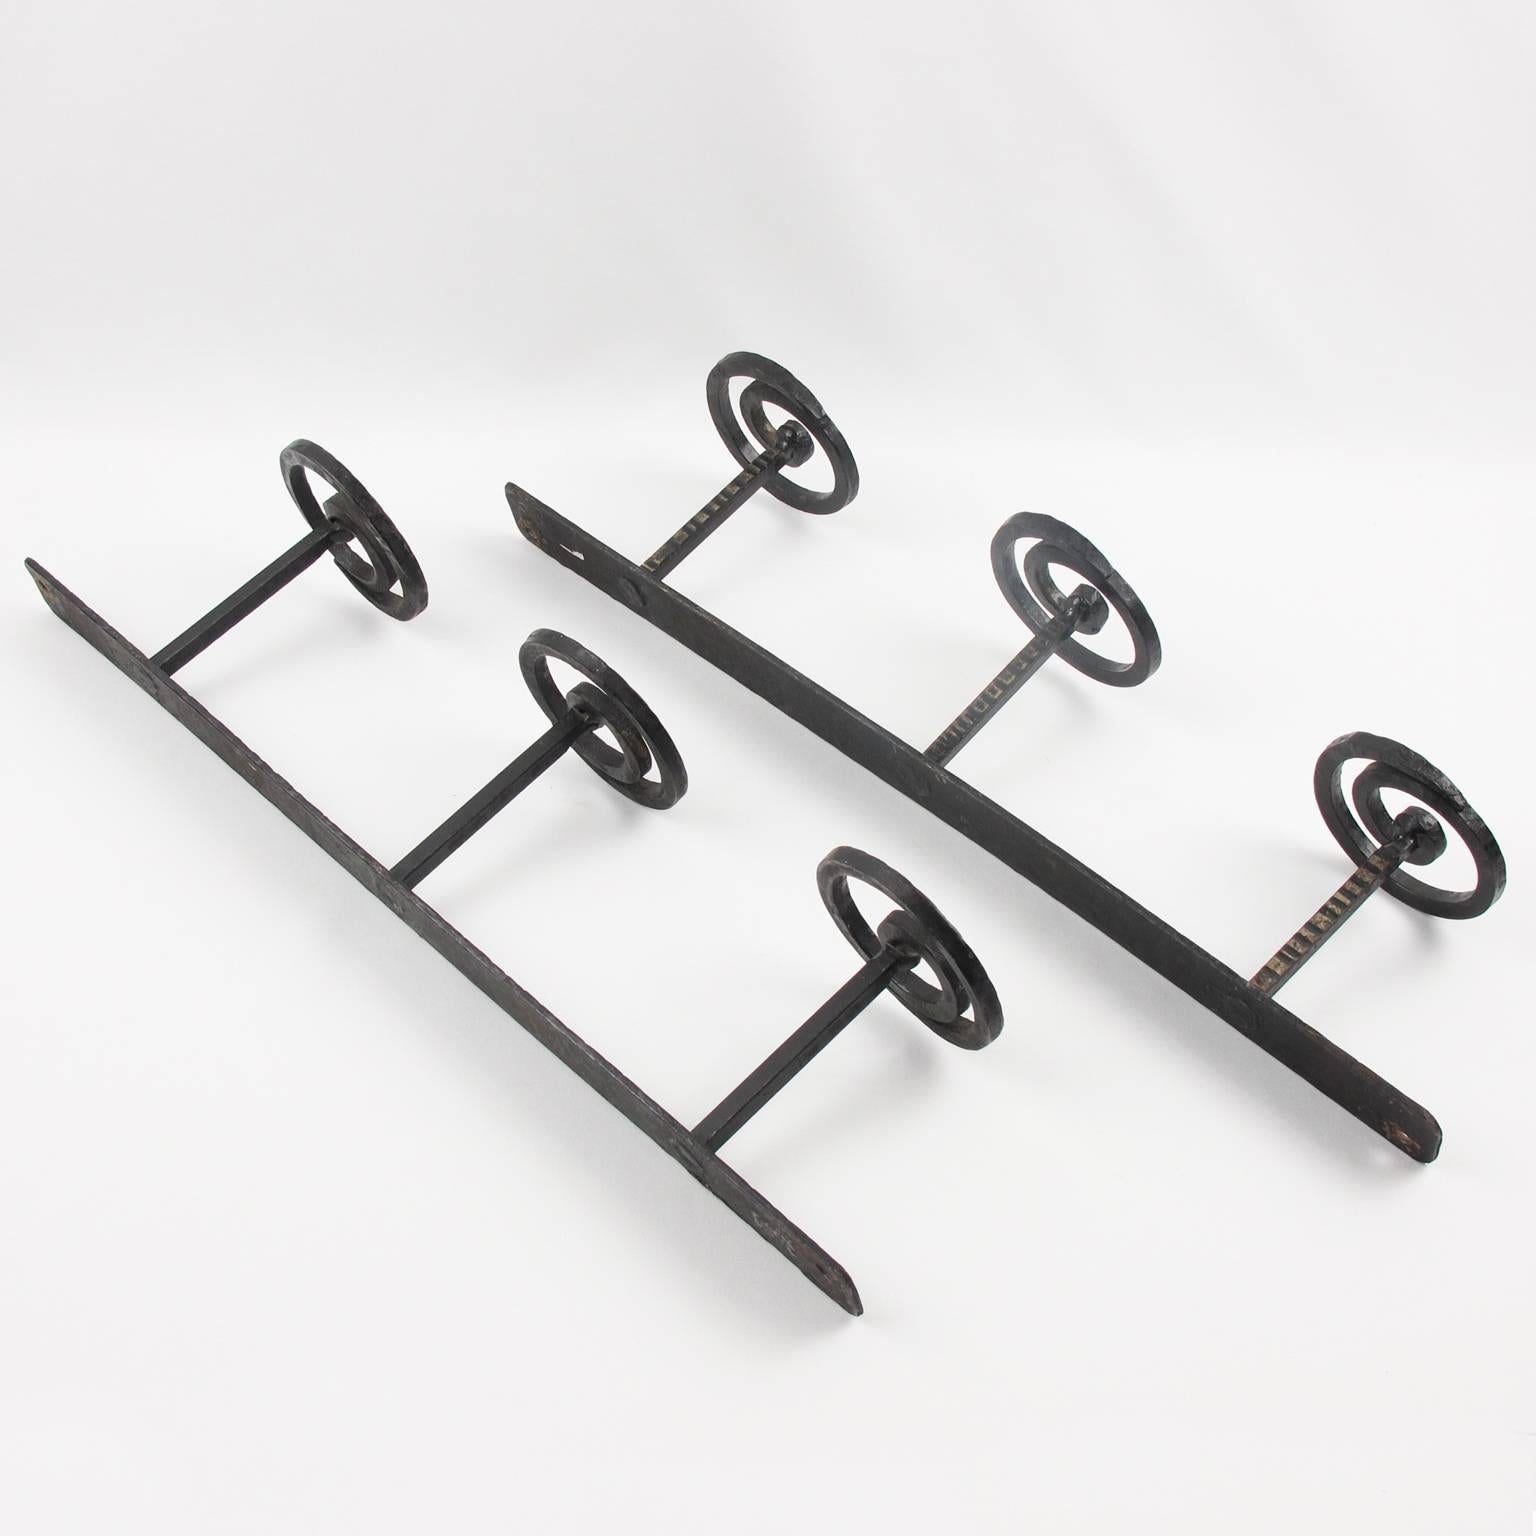 Early 20th Century 1910s French Art Nouveau Wall Mounted Pair of Wrought Iron Coat Rack